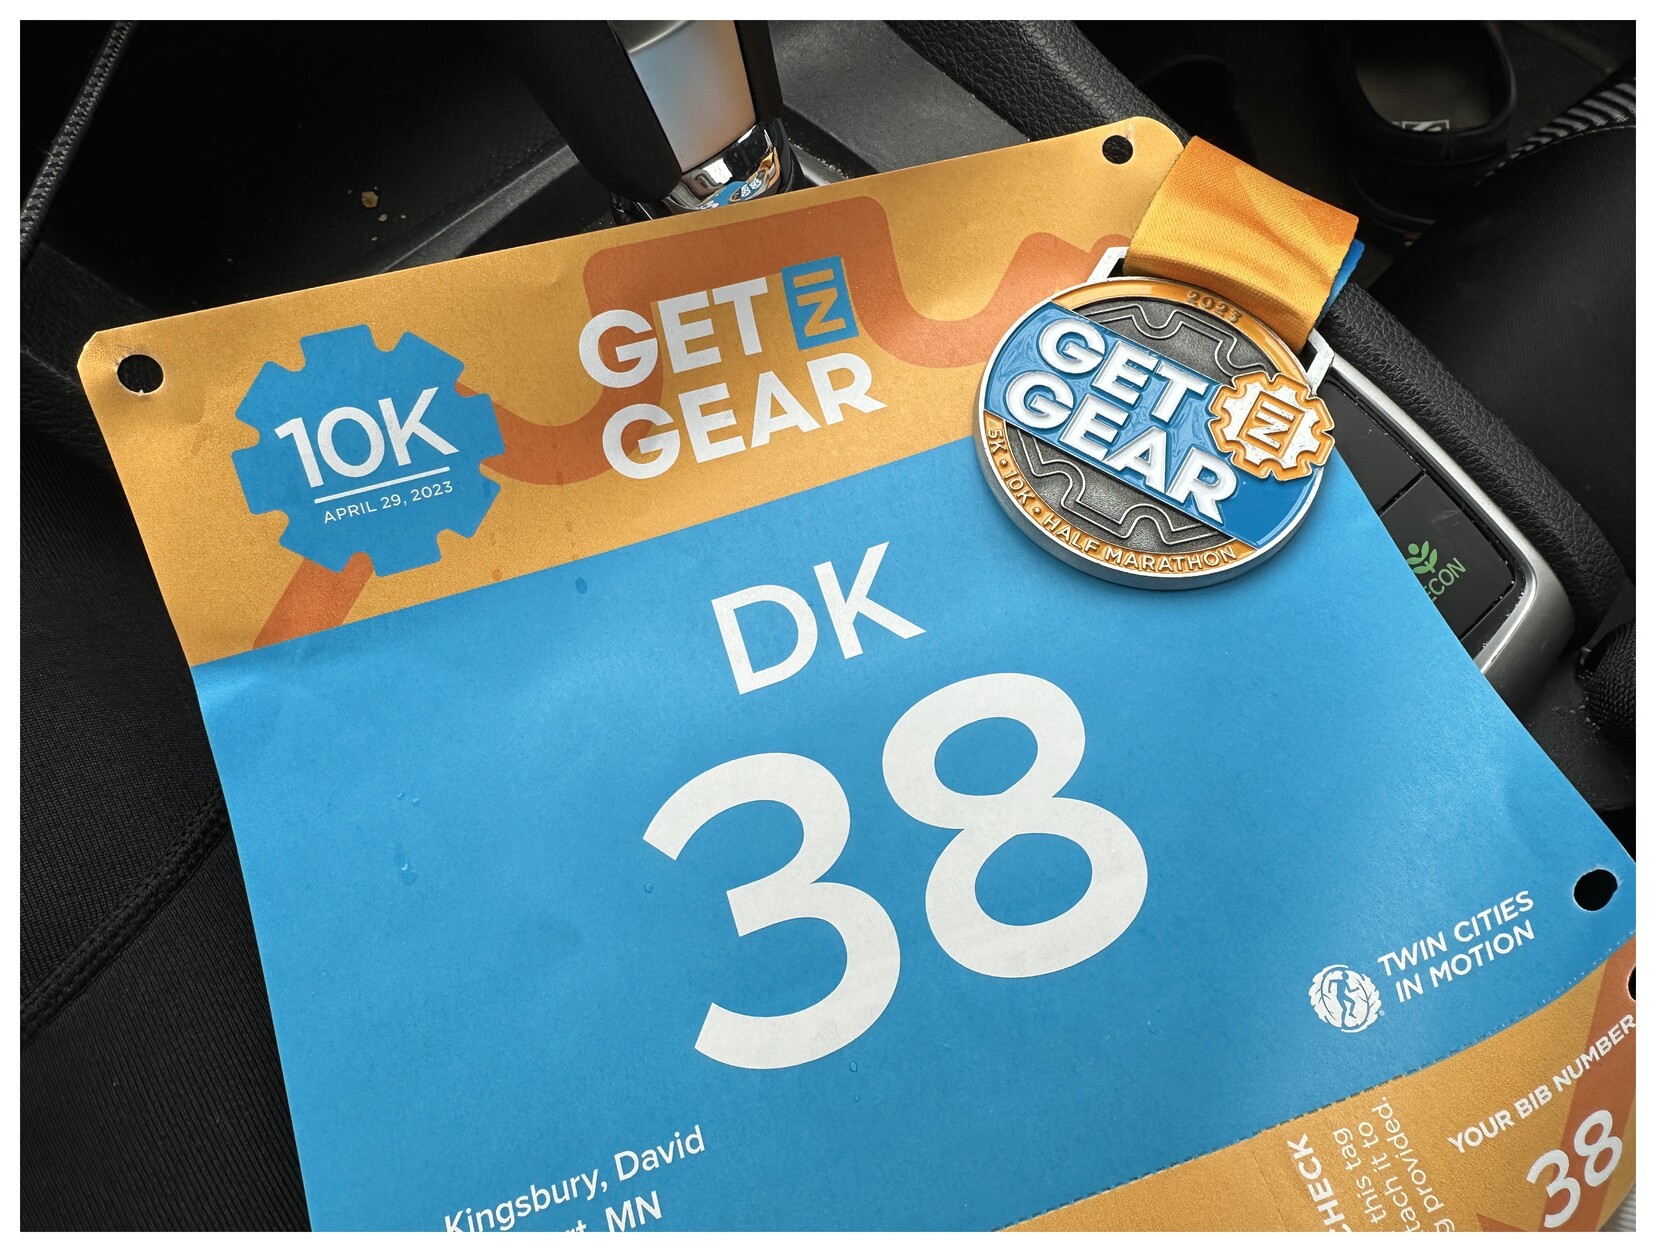 Get in Gear bib #38 and finisher medal